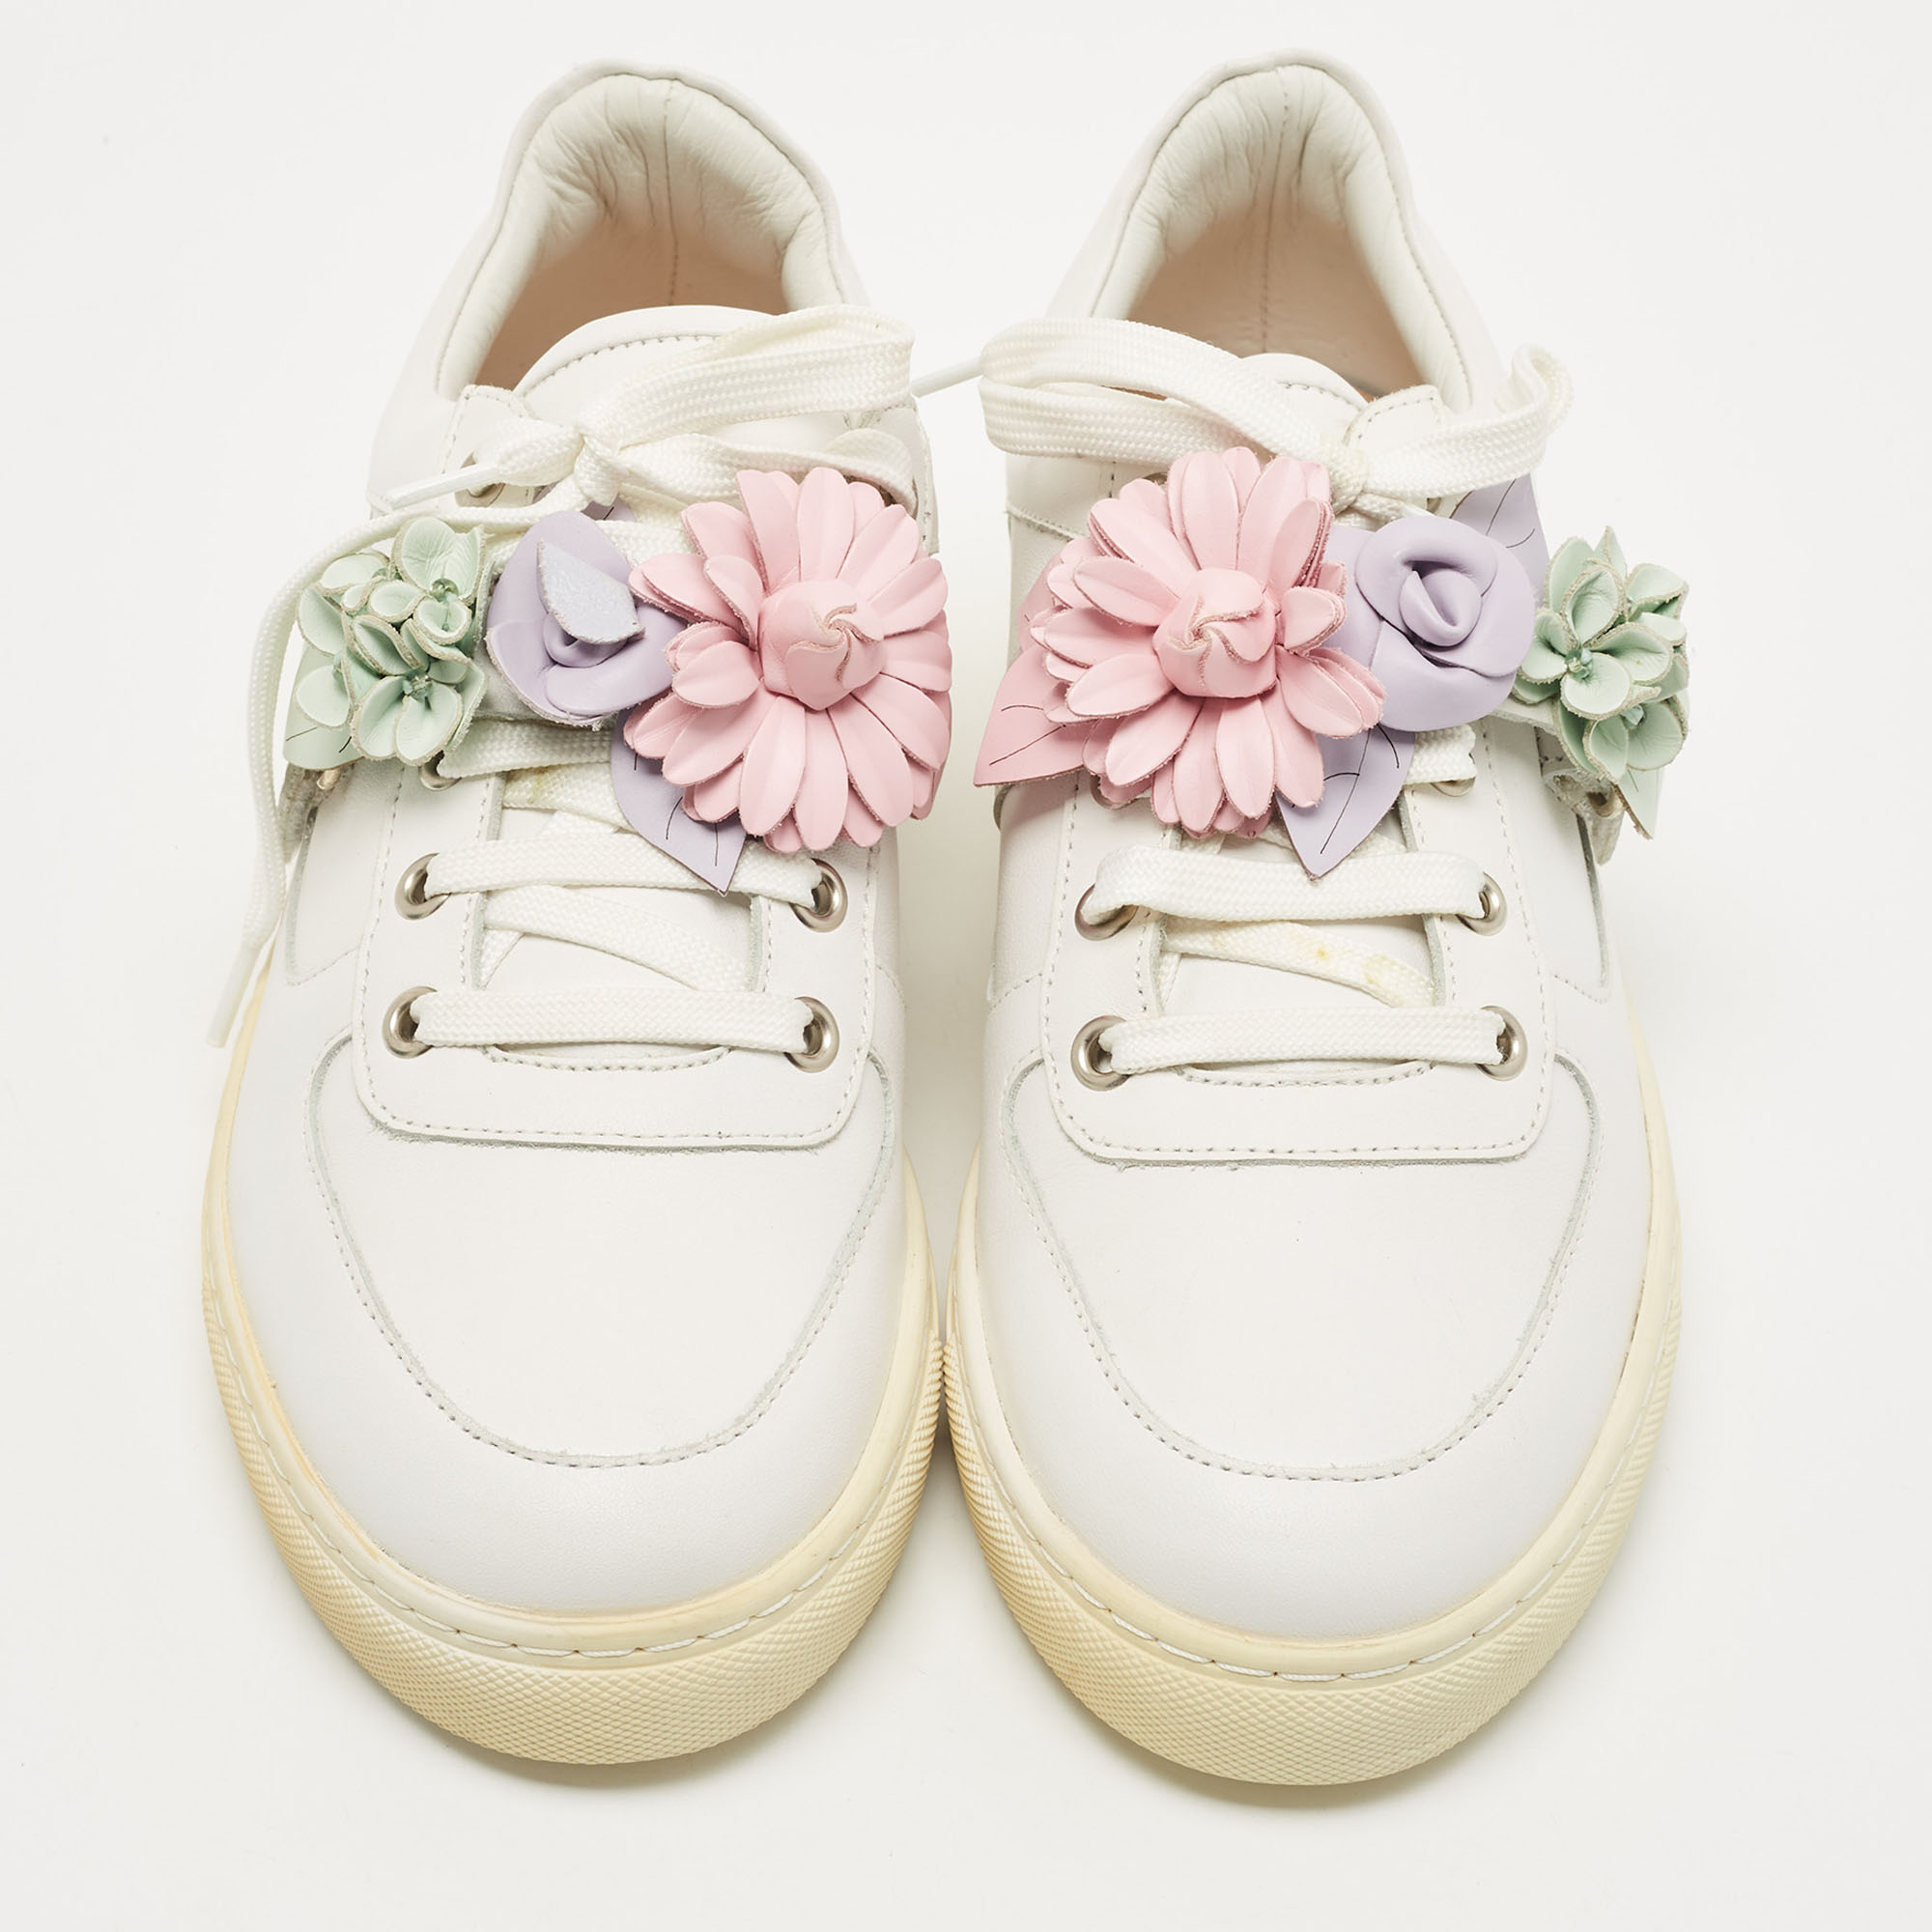 Sophia Webster White Leather Lilico Flower Low Top Sneakers Size 39